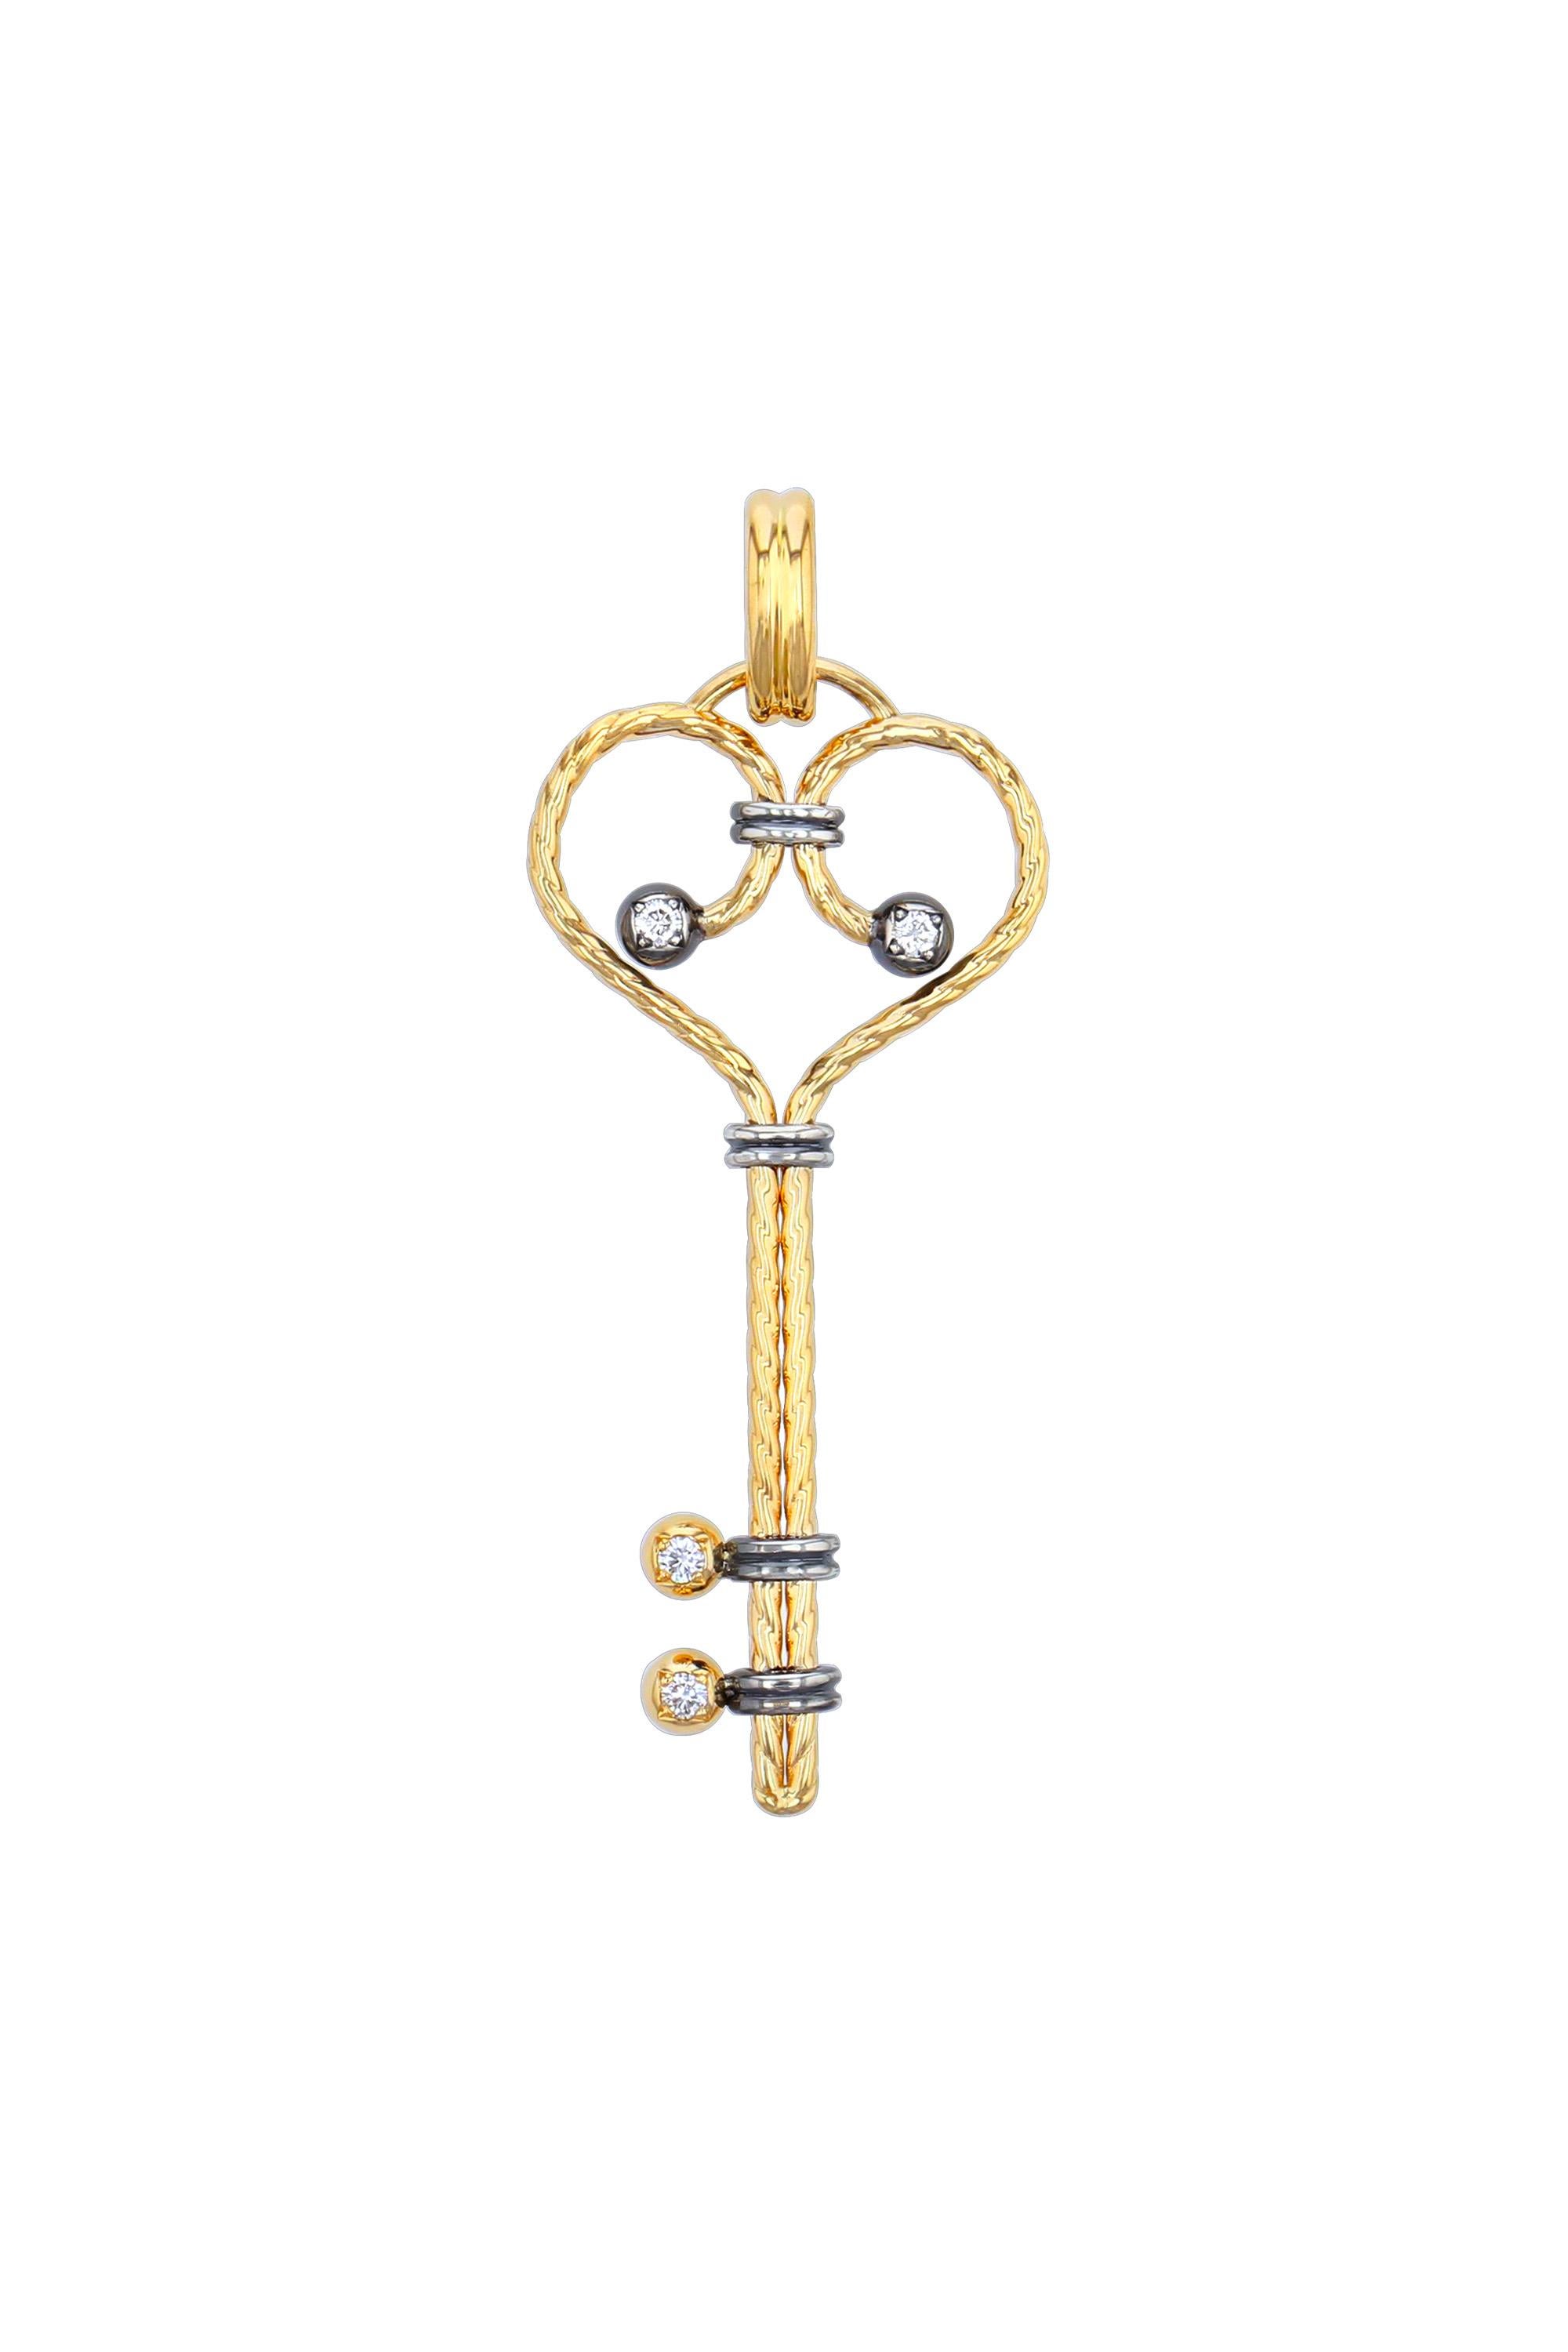 Clef charm, serpentine yellow gold twist punctuated with gold and silver balls, set with a diamond held by a set of distressed silver rings. Openable gold bail. 

Sold without chain.

Available with chain on request. 

Details:
GVS Diamonds: 0.16